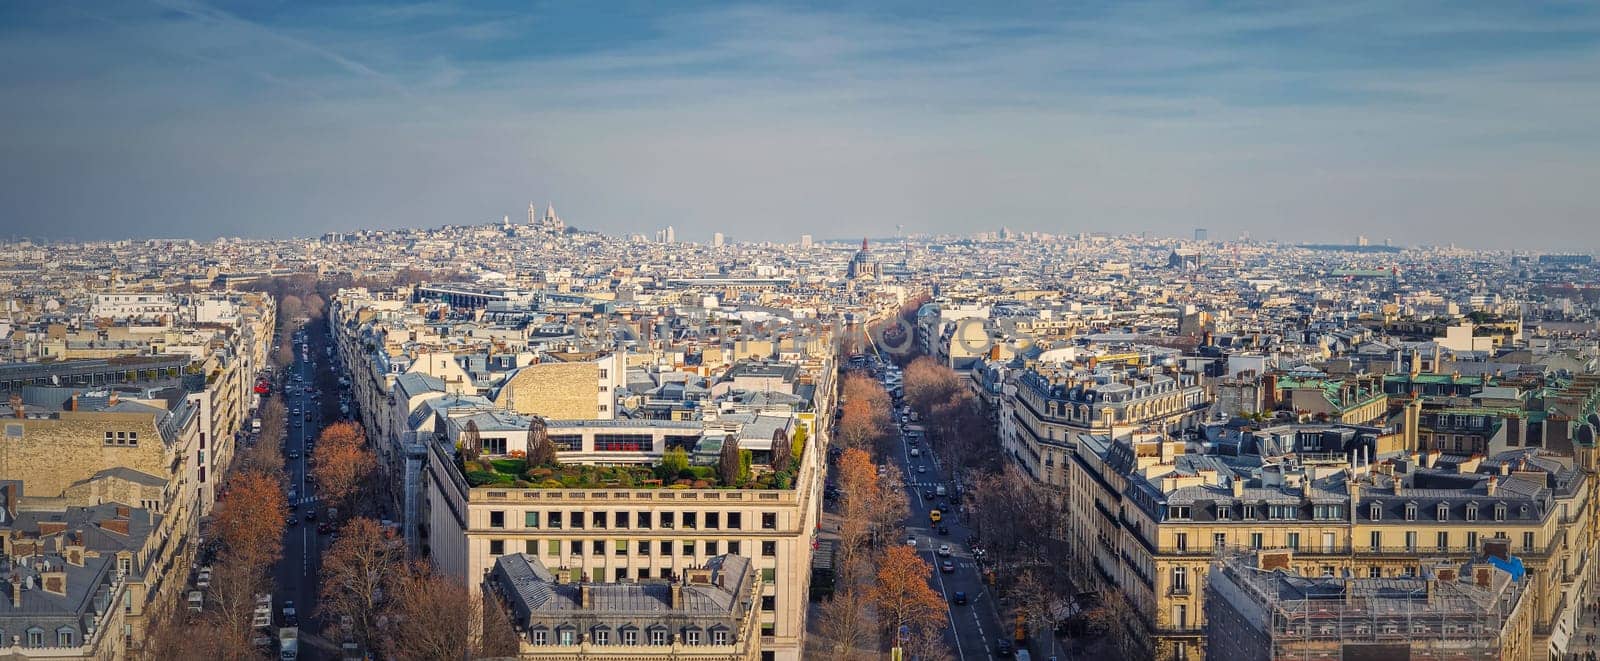 Aerial Paris cityscape panorama with view to Sacre Coeur Basilica of the Sacred Heart, France. Beautiful parisian architecture, historic buildings and landmarks on the horizon